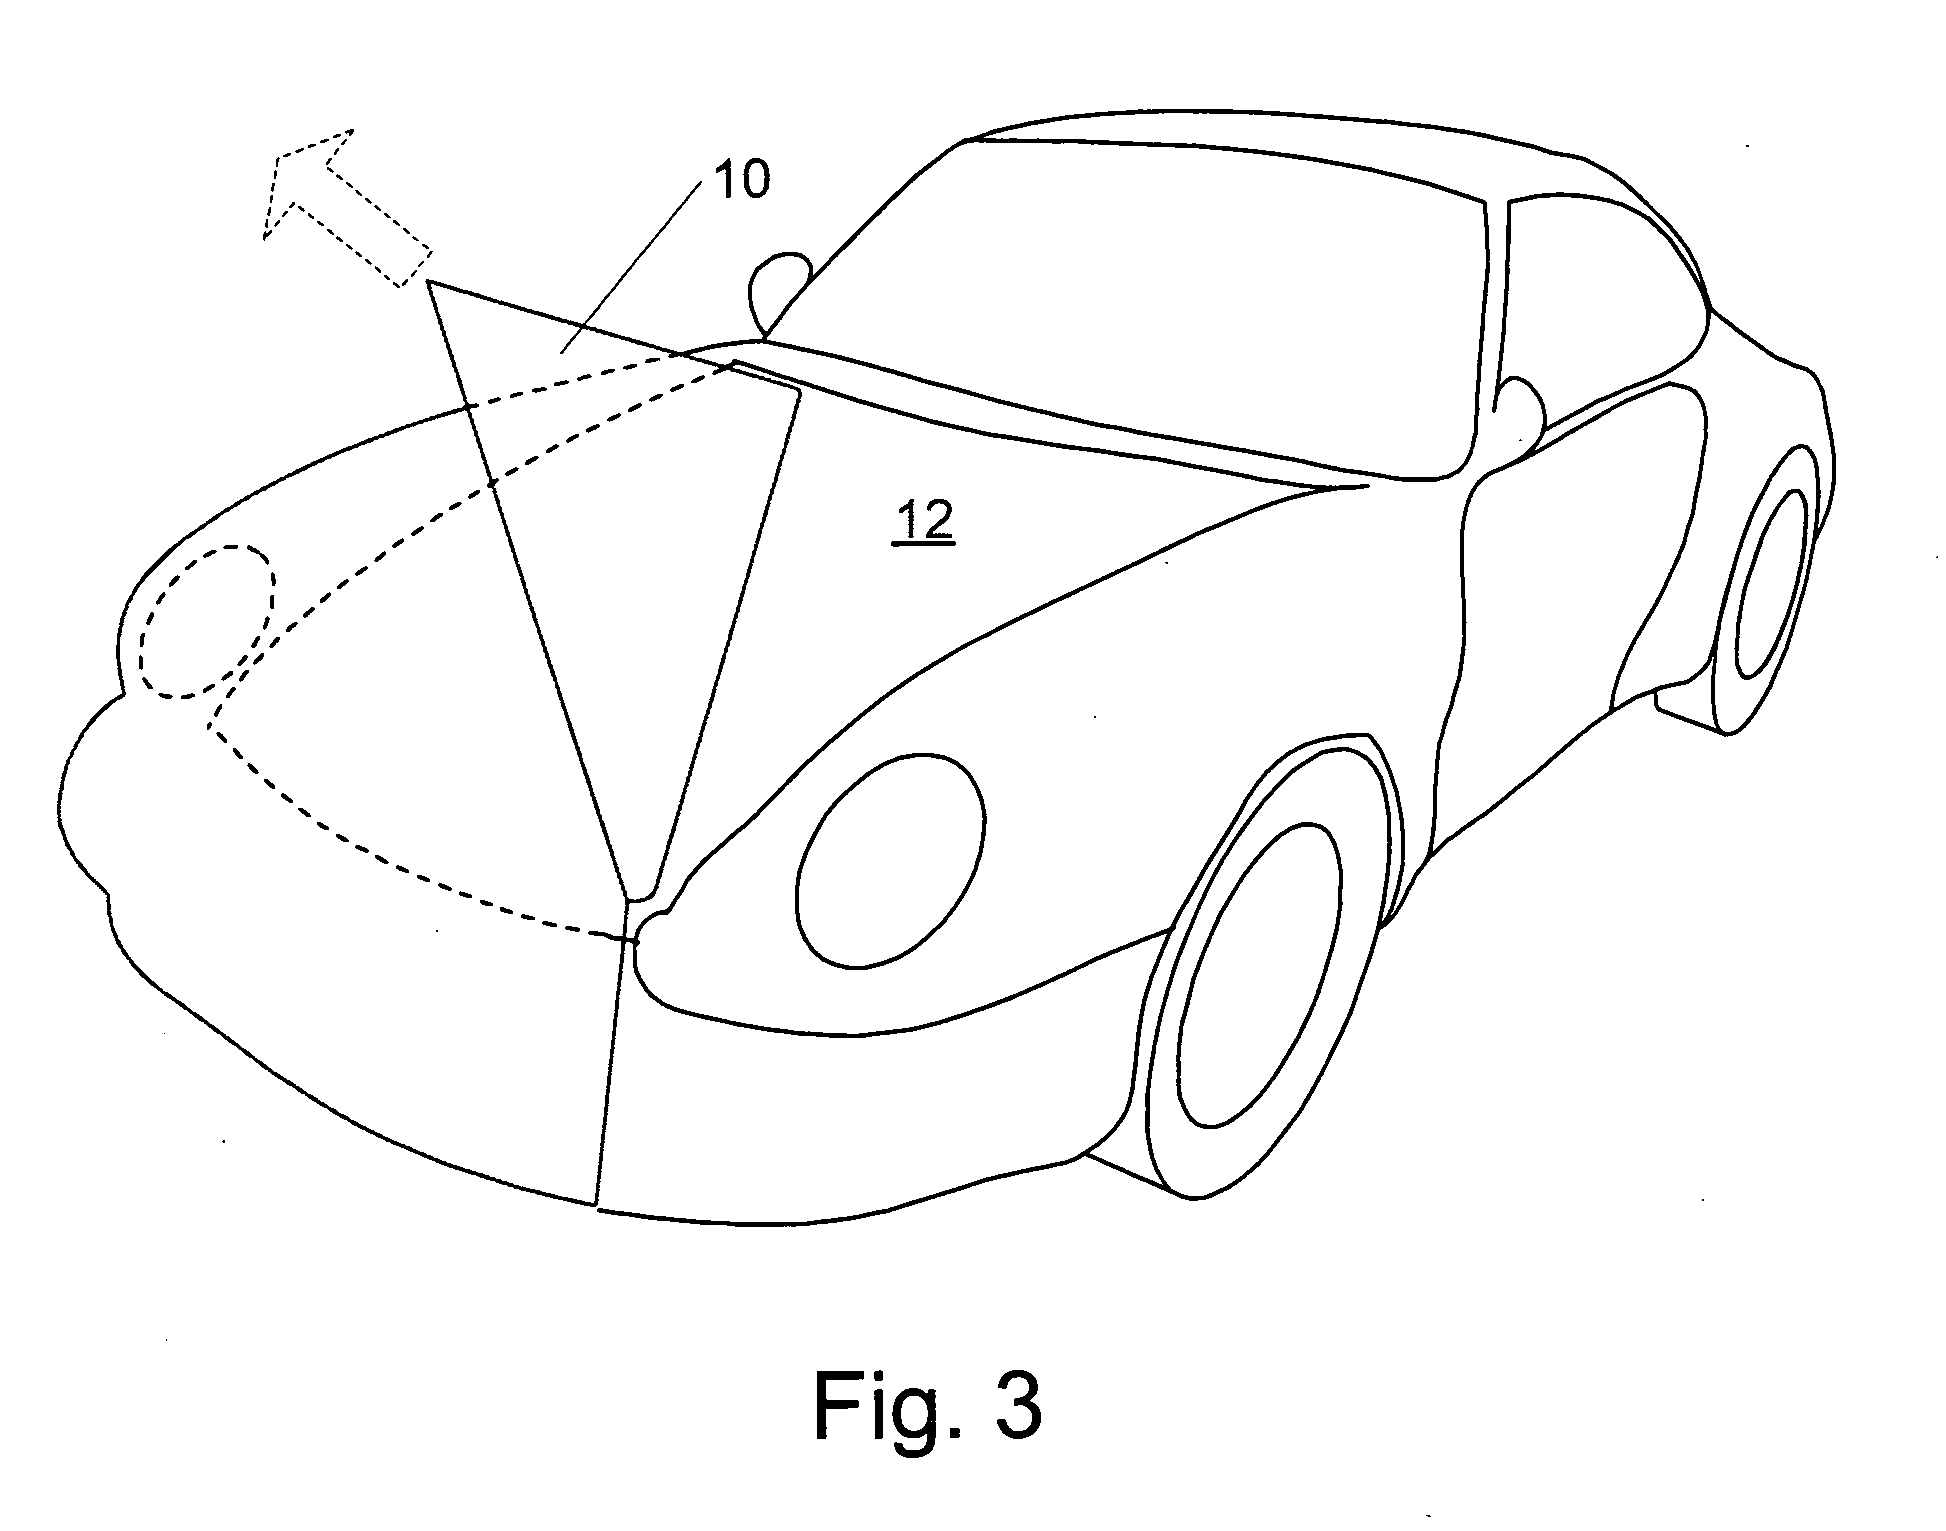 Protective coating compositions, systems, and methods